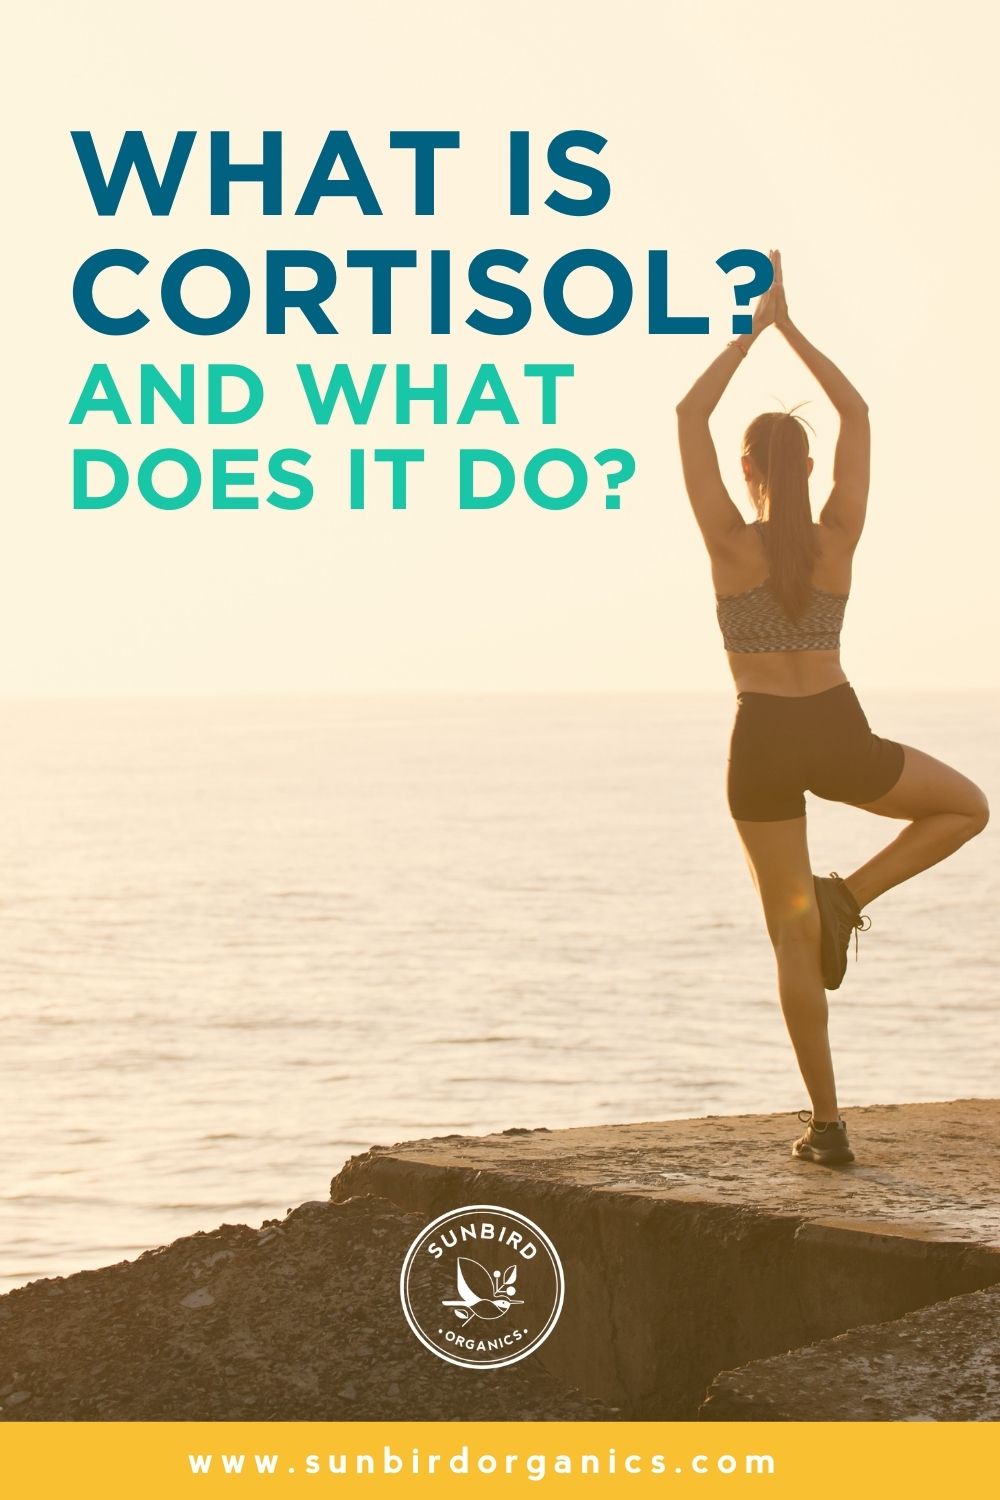 What is cortisol?